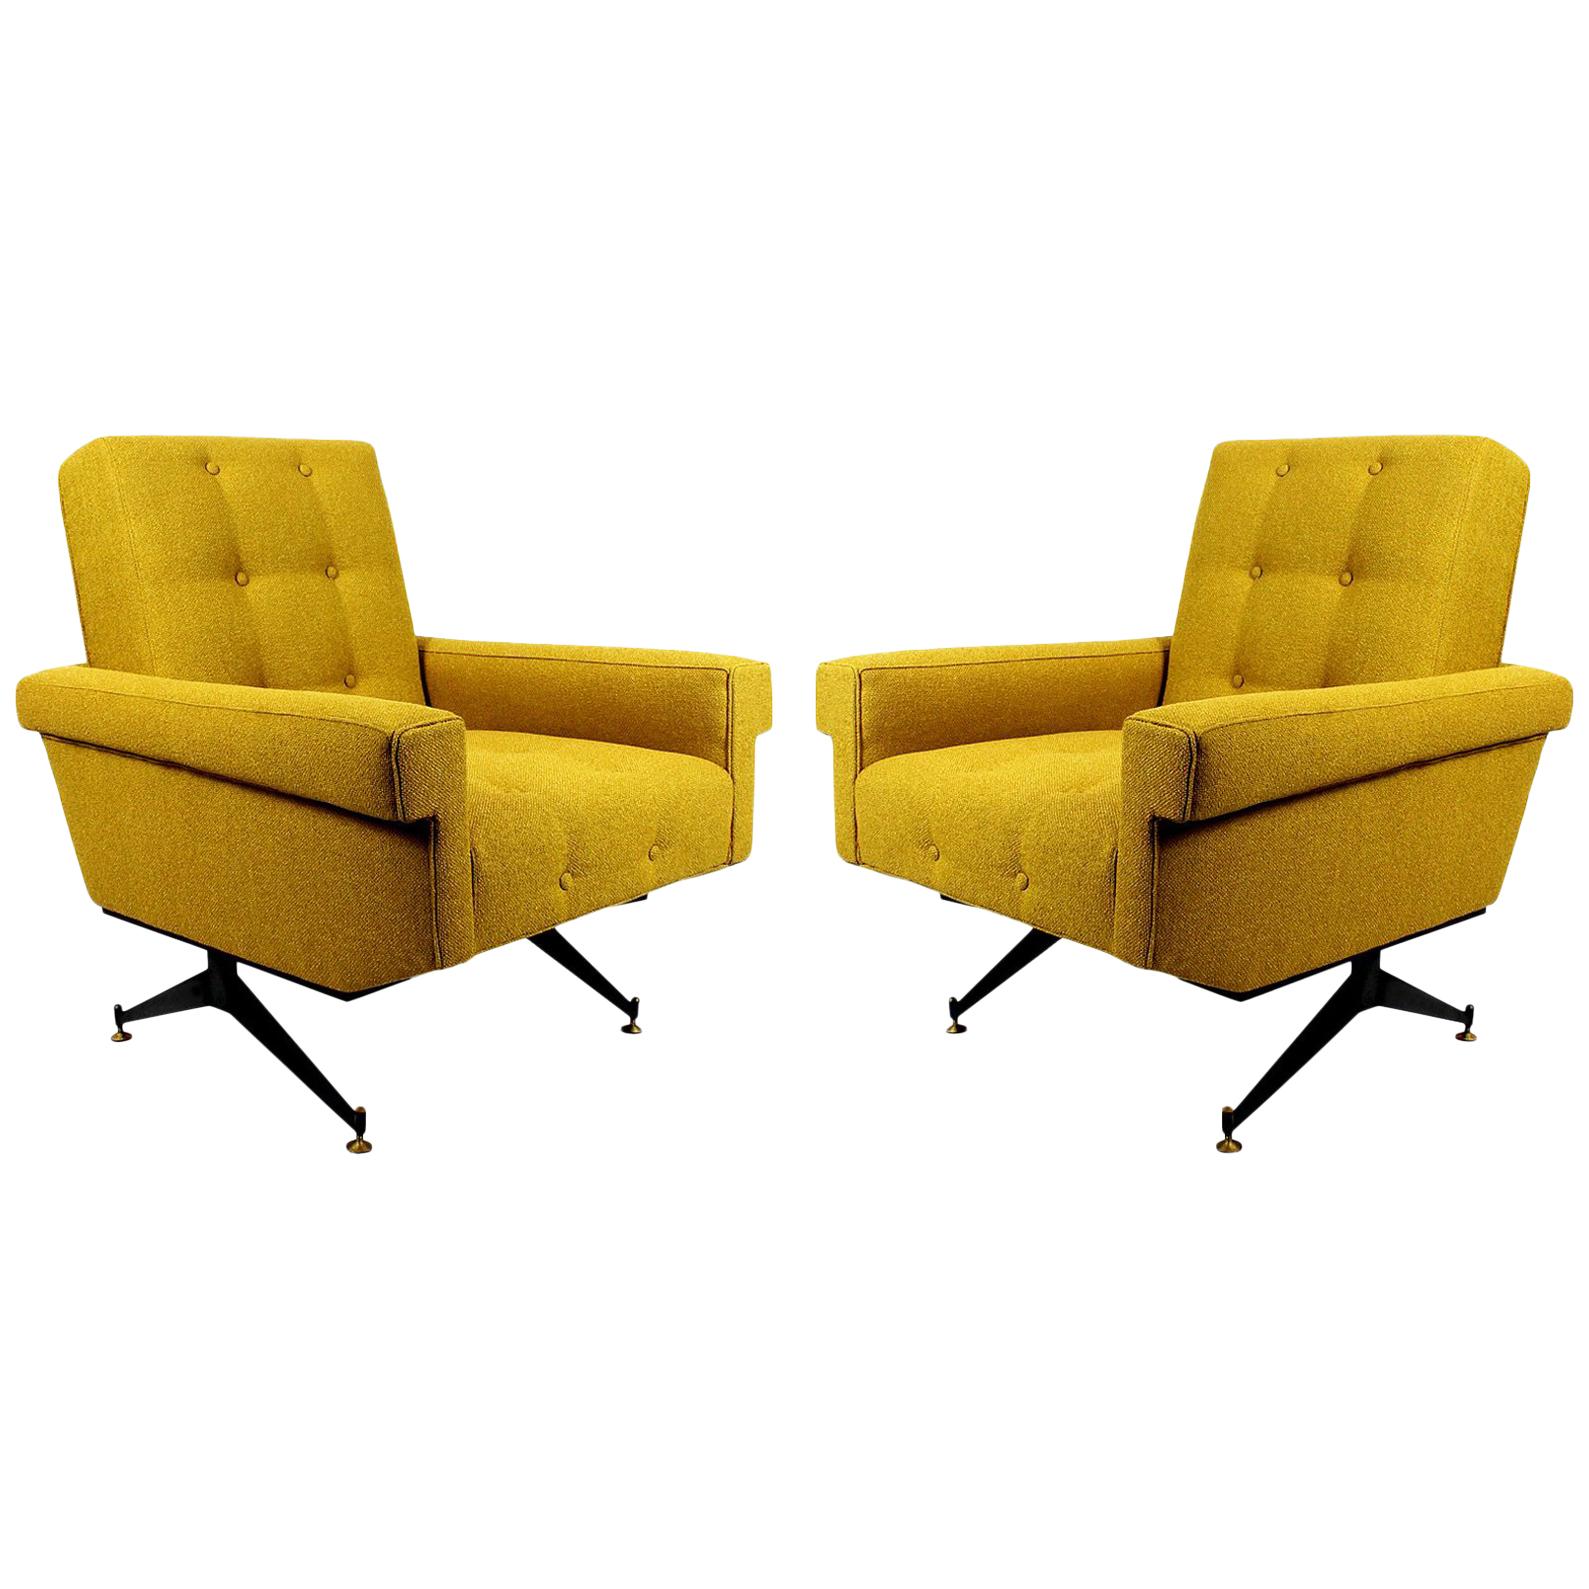 Pair of Mid-Century Modern Padded Armchairs With Yellow-Mustard Fabric - Italy For Sale